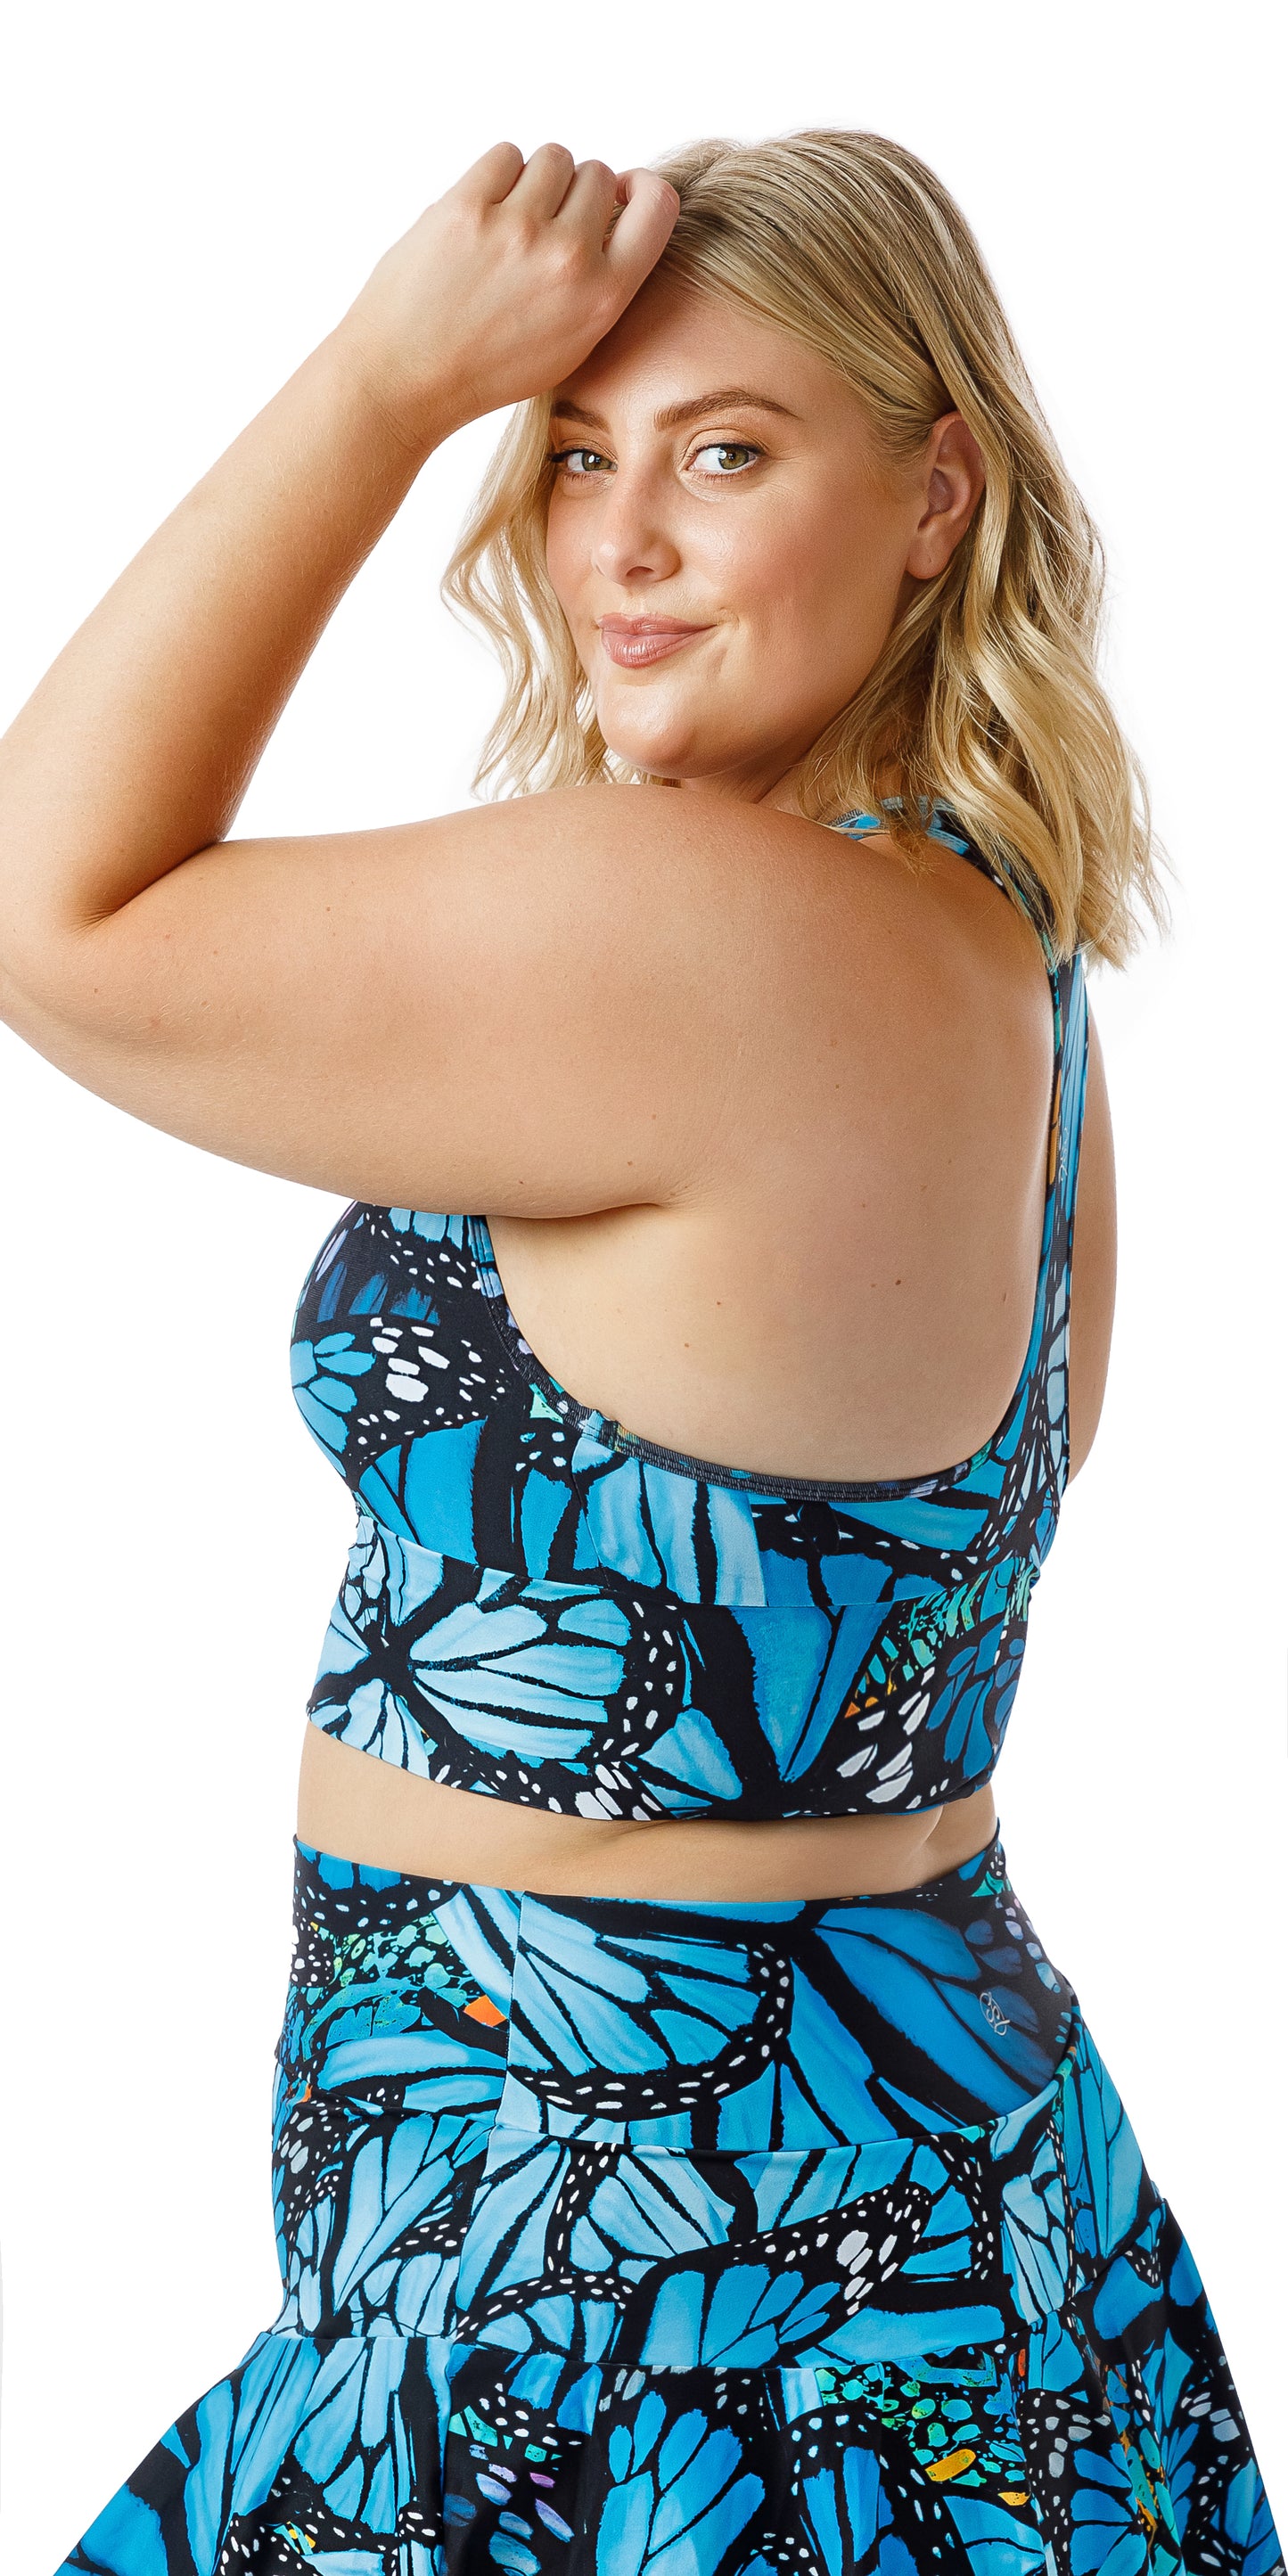 Side view of girl wearing blue animal print JH Butterfly Racer Back Bra putting her left hand on her forehead